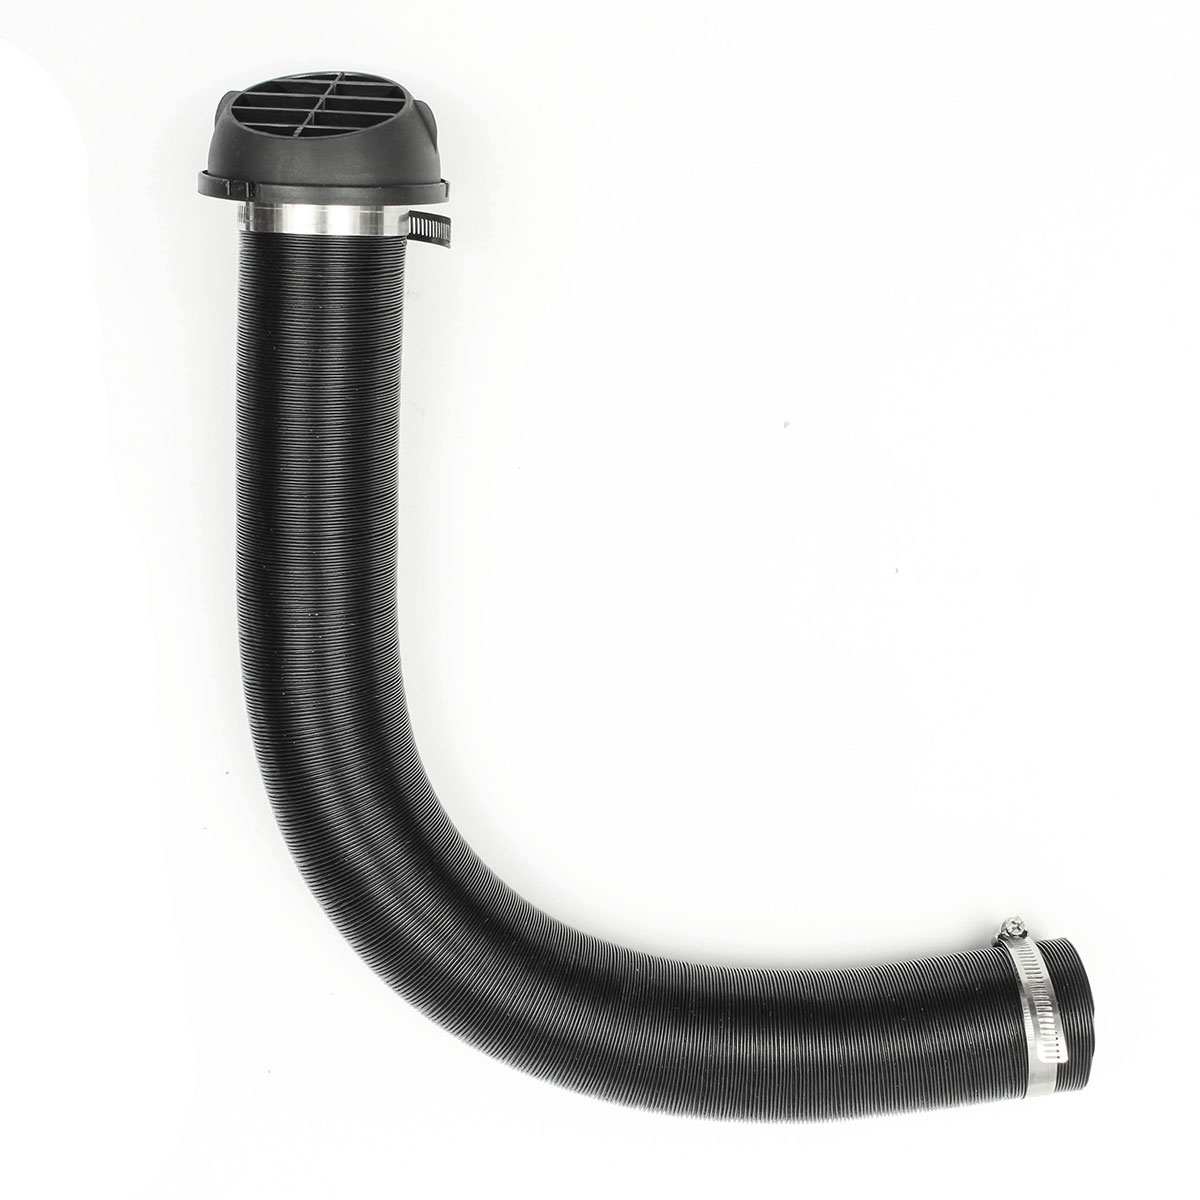 24mm-Exhaust-Silencer-25mm-Filter-Exhaust--Intake-Pipe-For-Air-Diesel-Heater-1412374-9